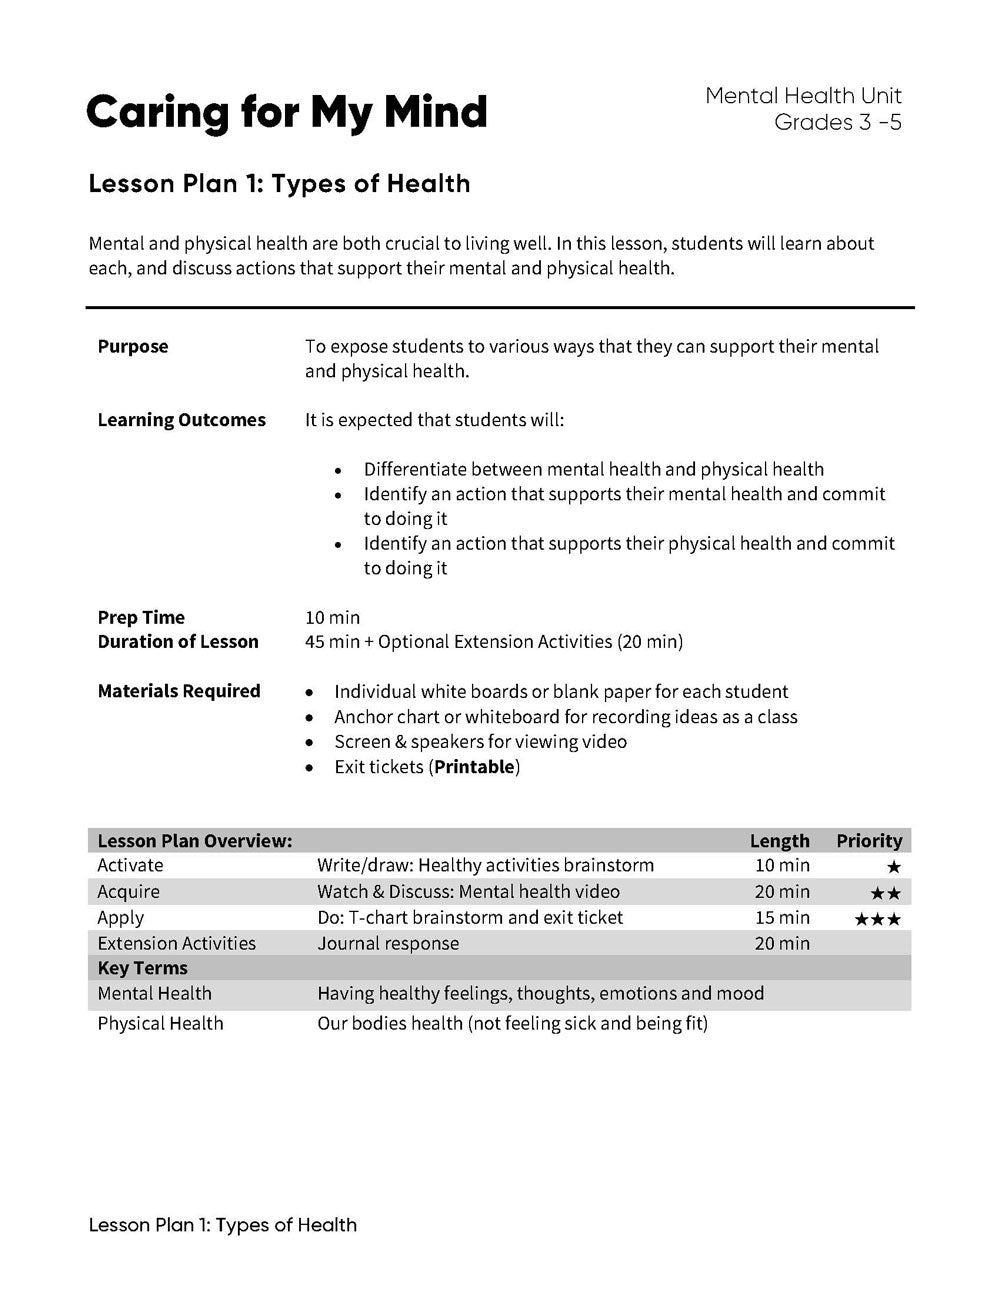 Lesson Plan 1: Types of Health